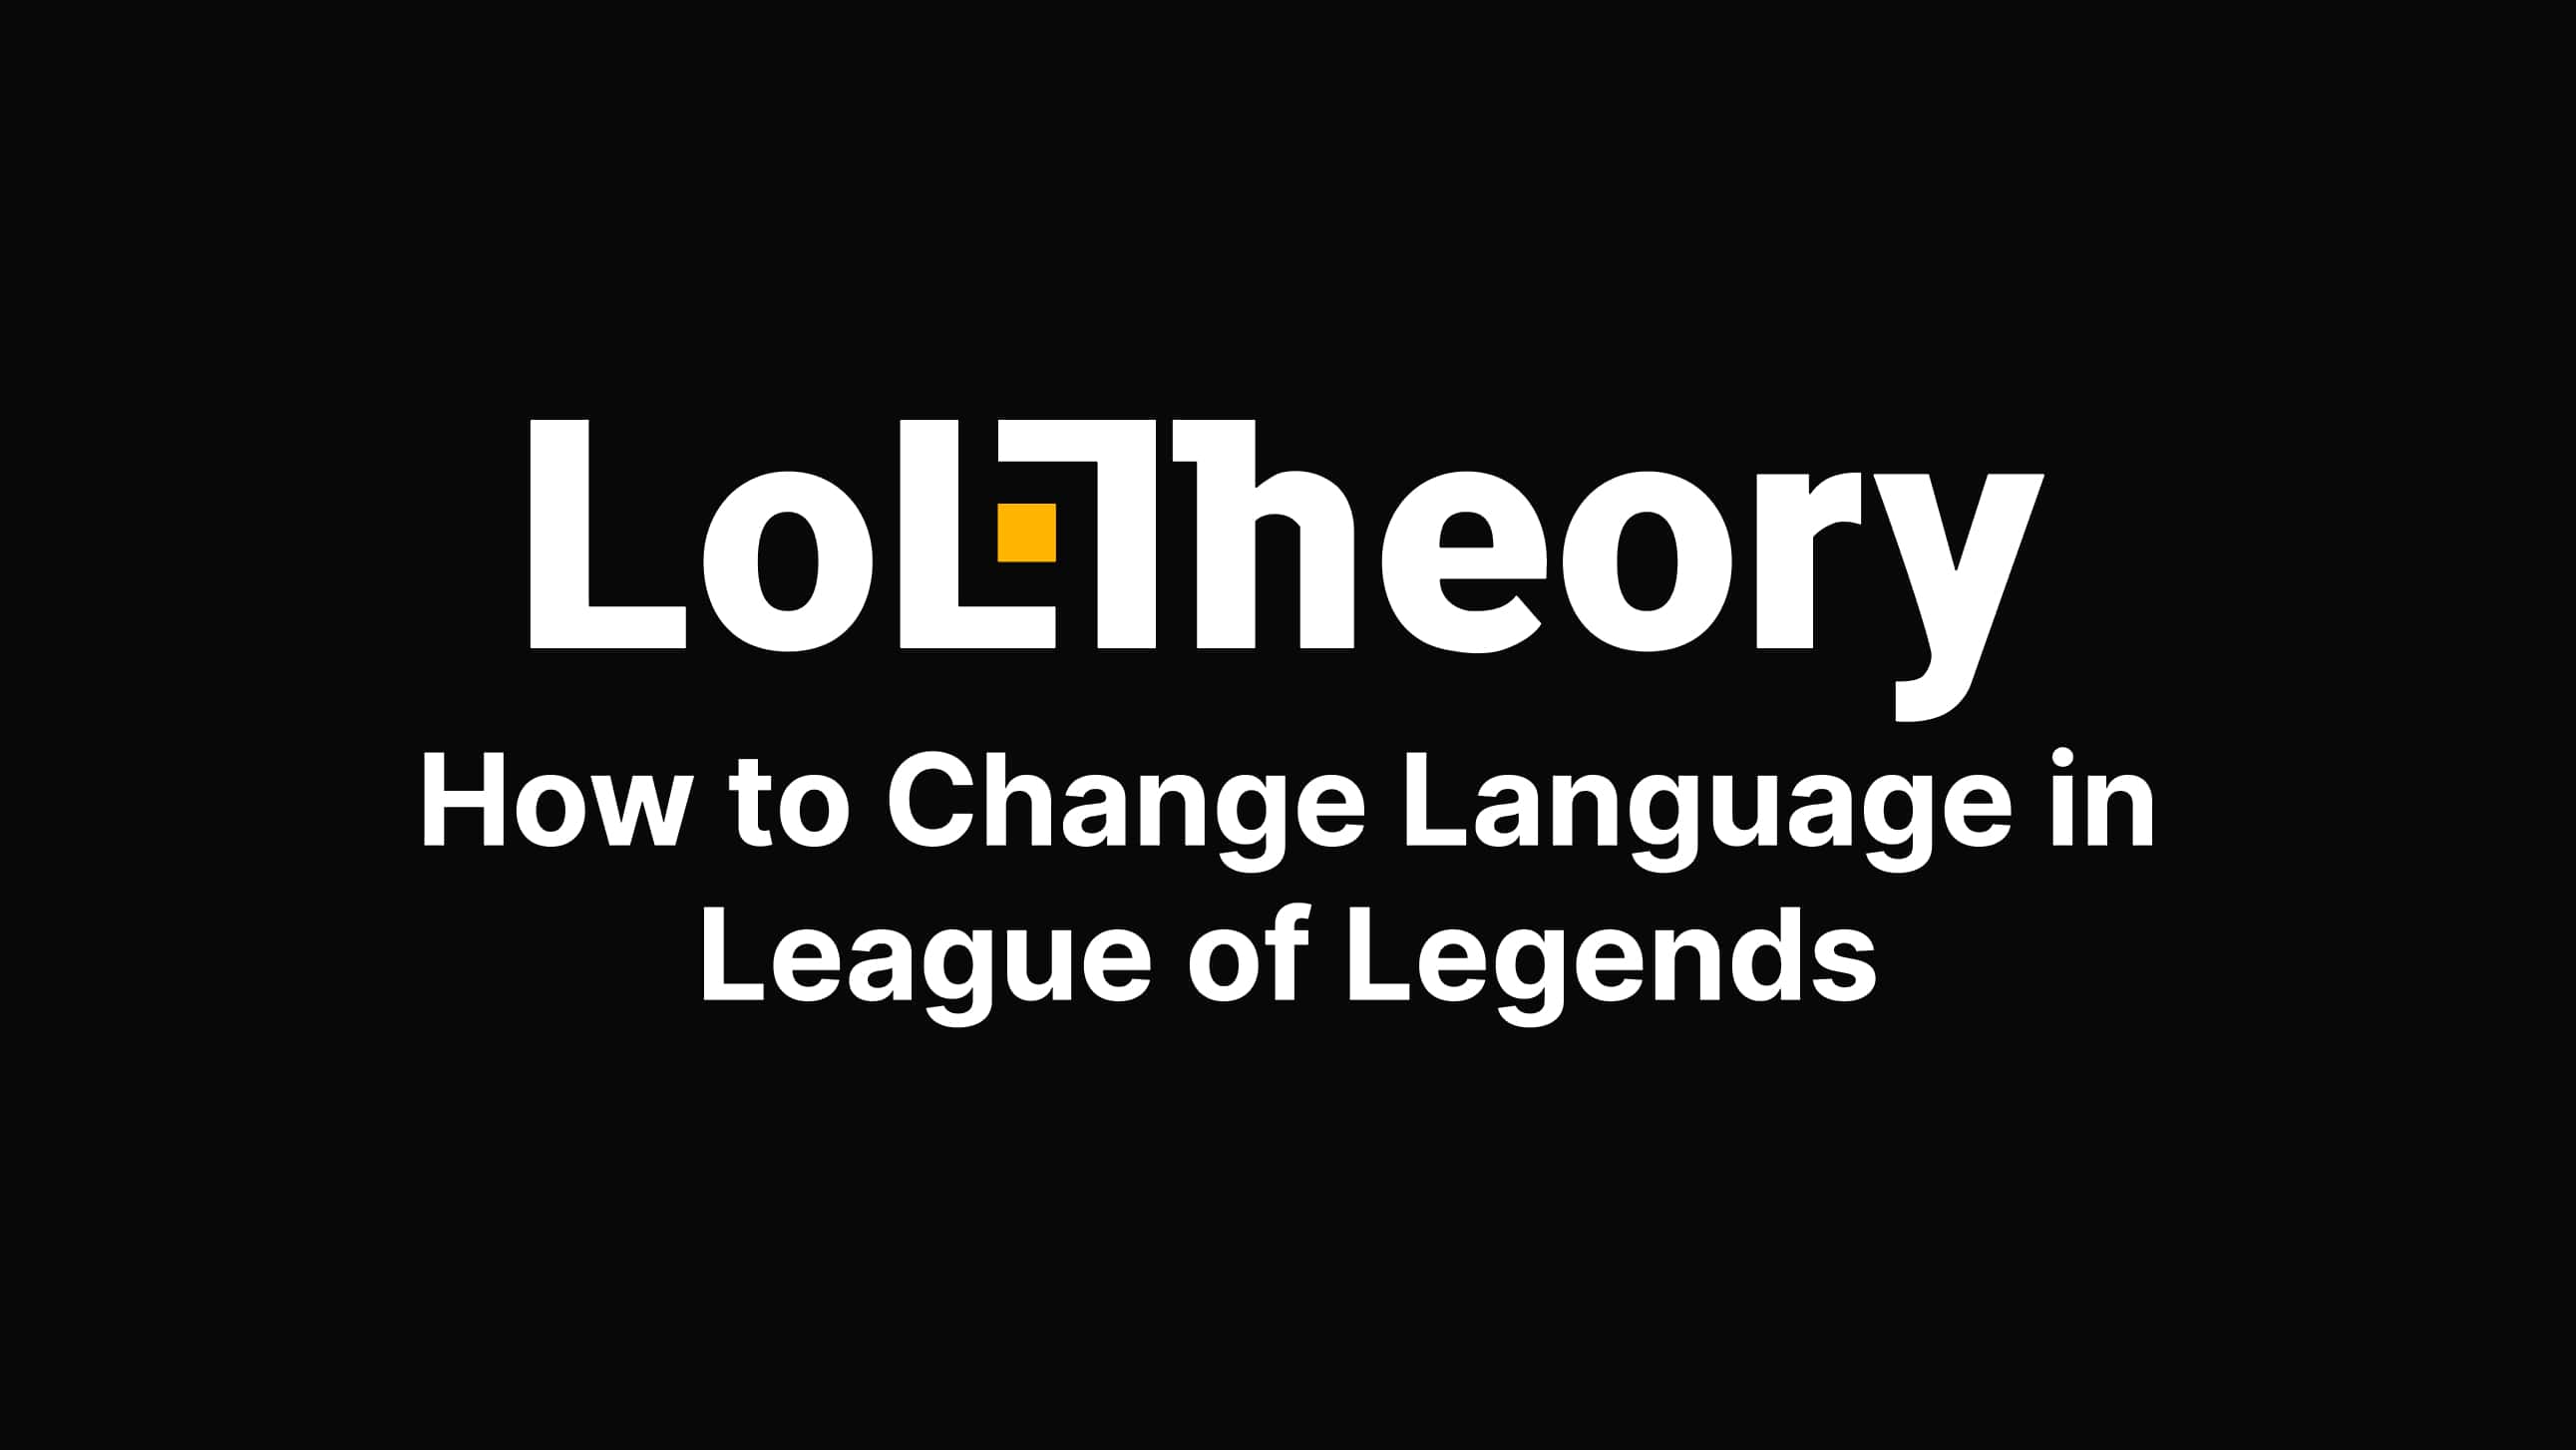 You can change language in League of Legends client in 2023